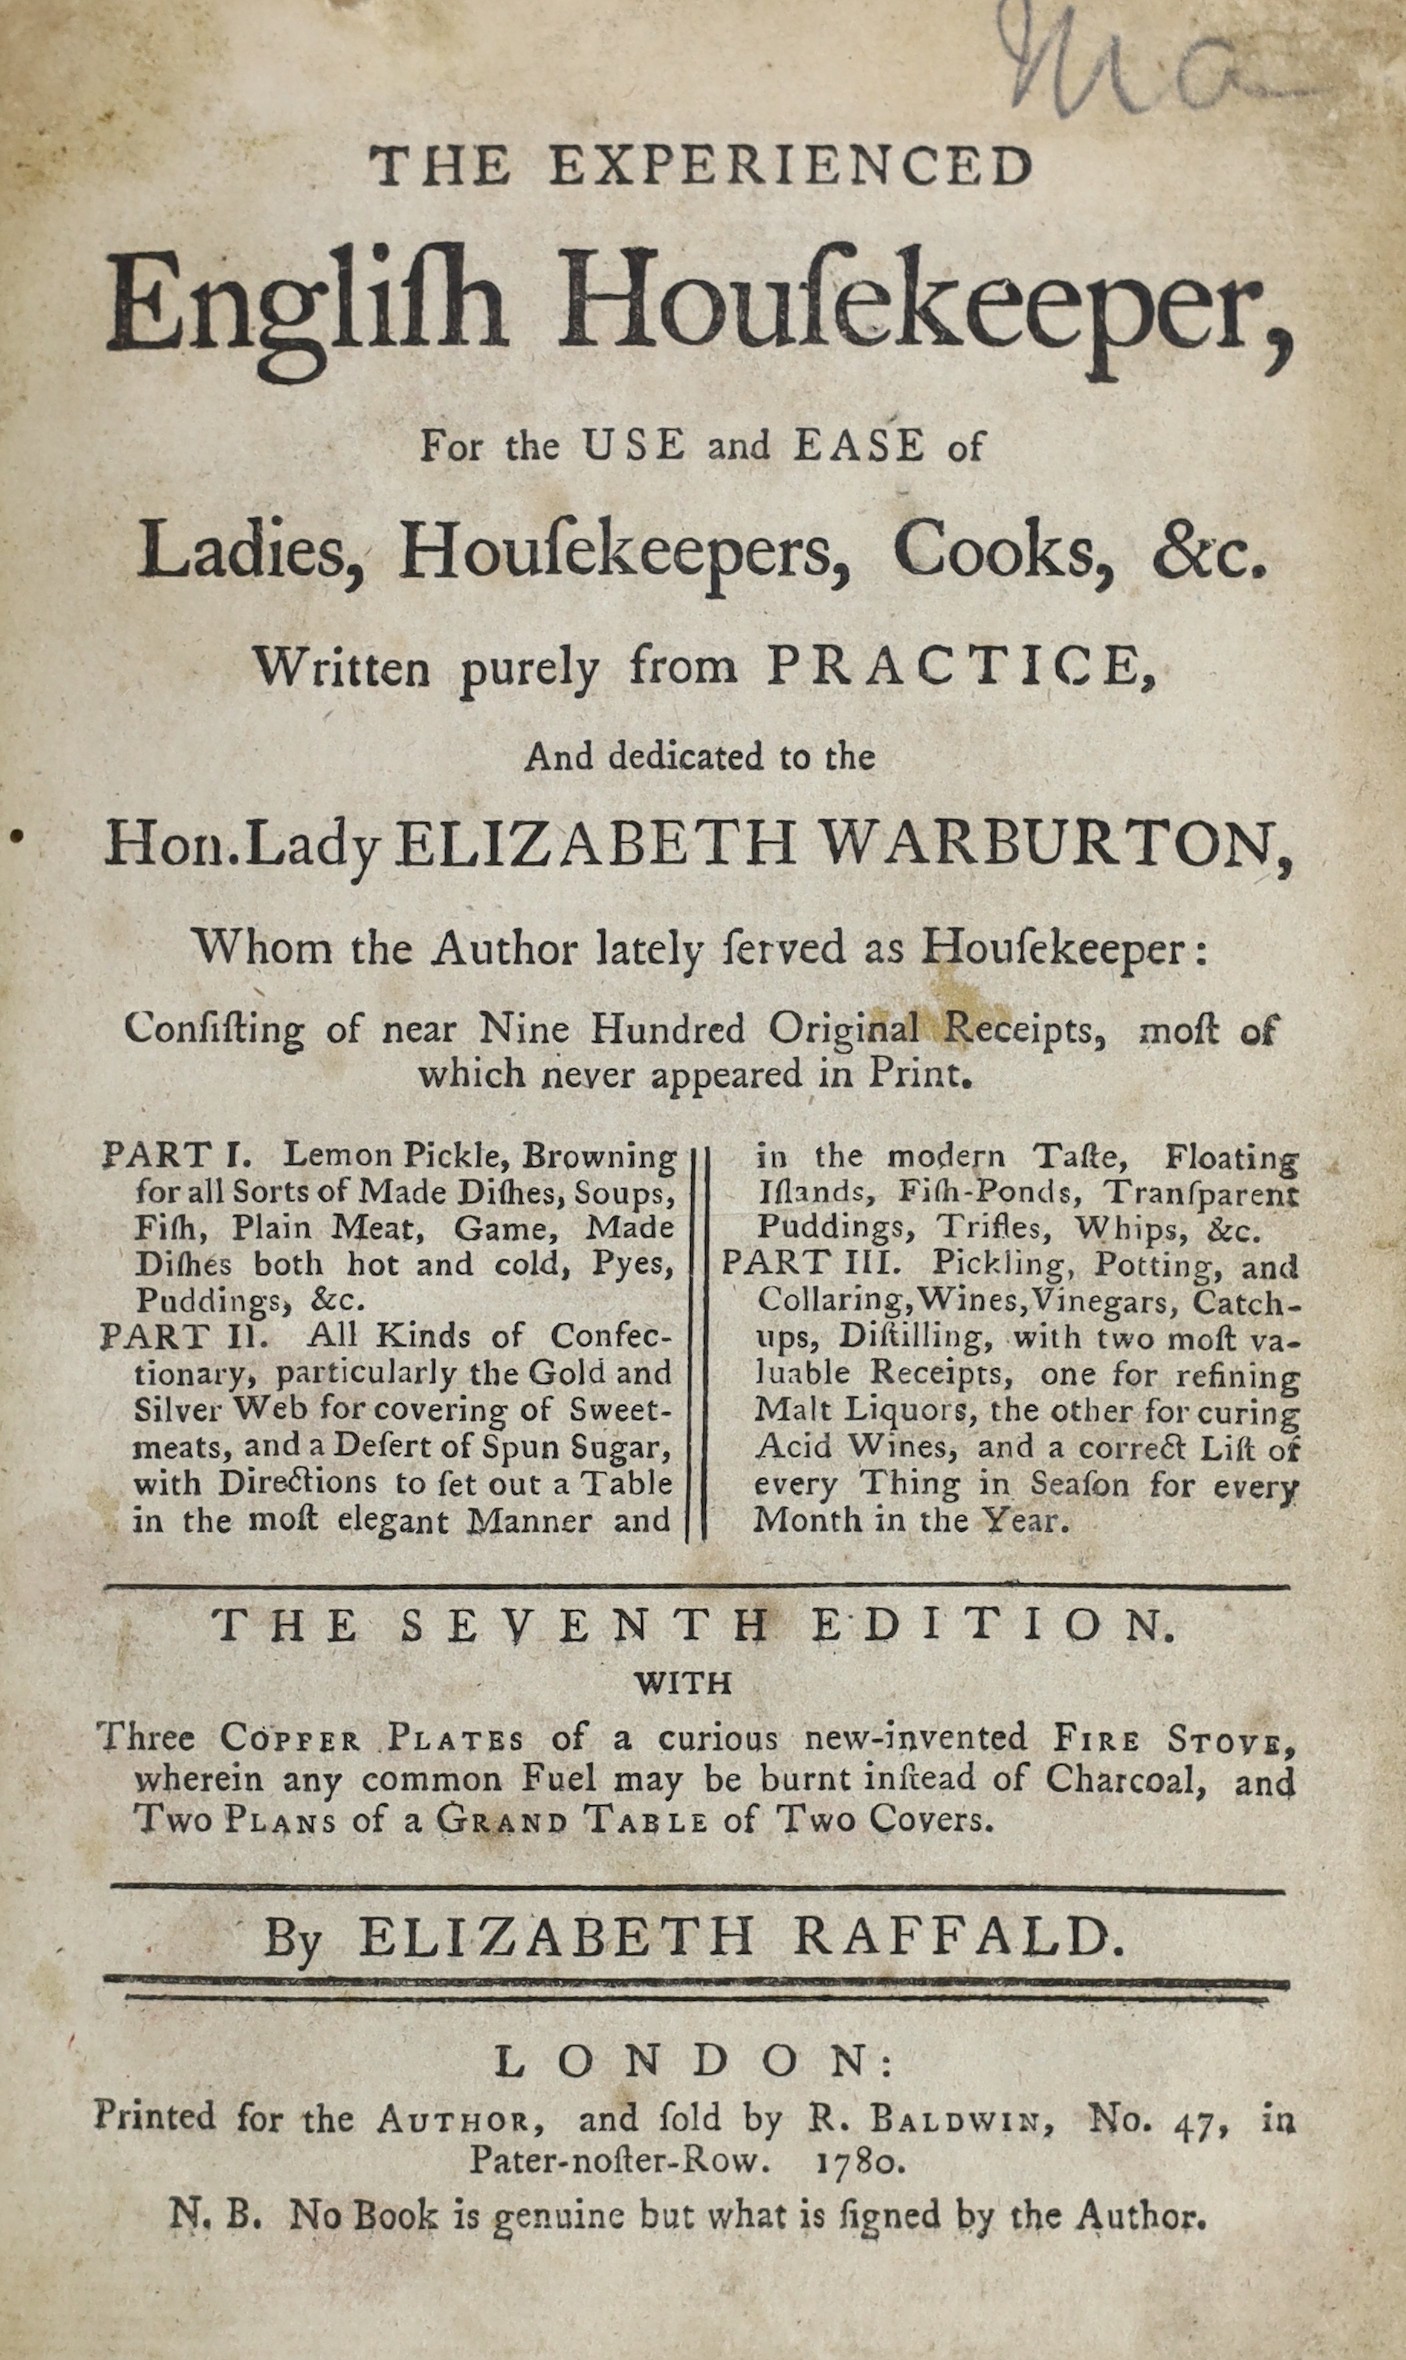 Raffald, Elizabeth -The experienced English Housekeeper, for the use and ease of ladies, housekeepers, cooks, &c .... 7th edition. 3 folded plates; contemp. calf (sometime rebacked with gilt ruled panelled spine). printe